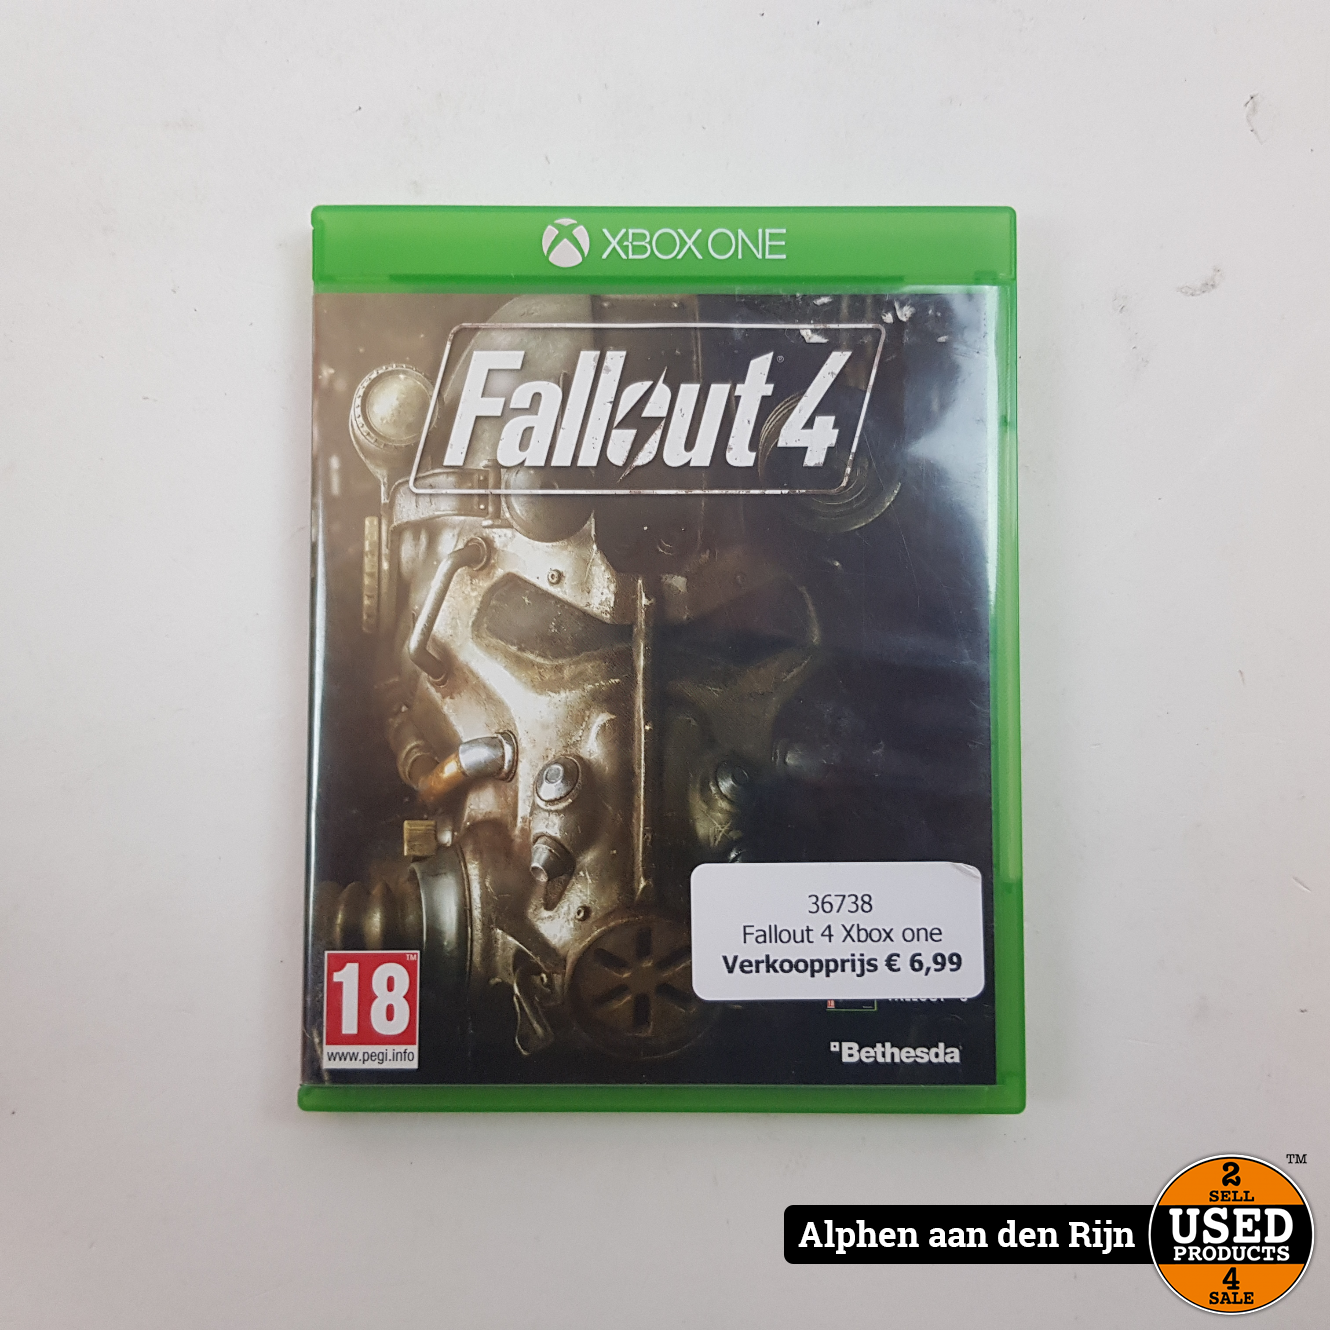 Fallout 4 Xbox one - Used Products Alphen aan den